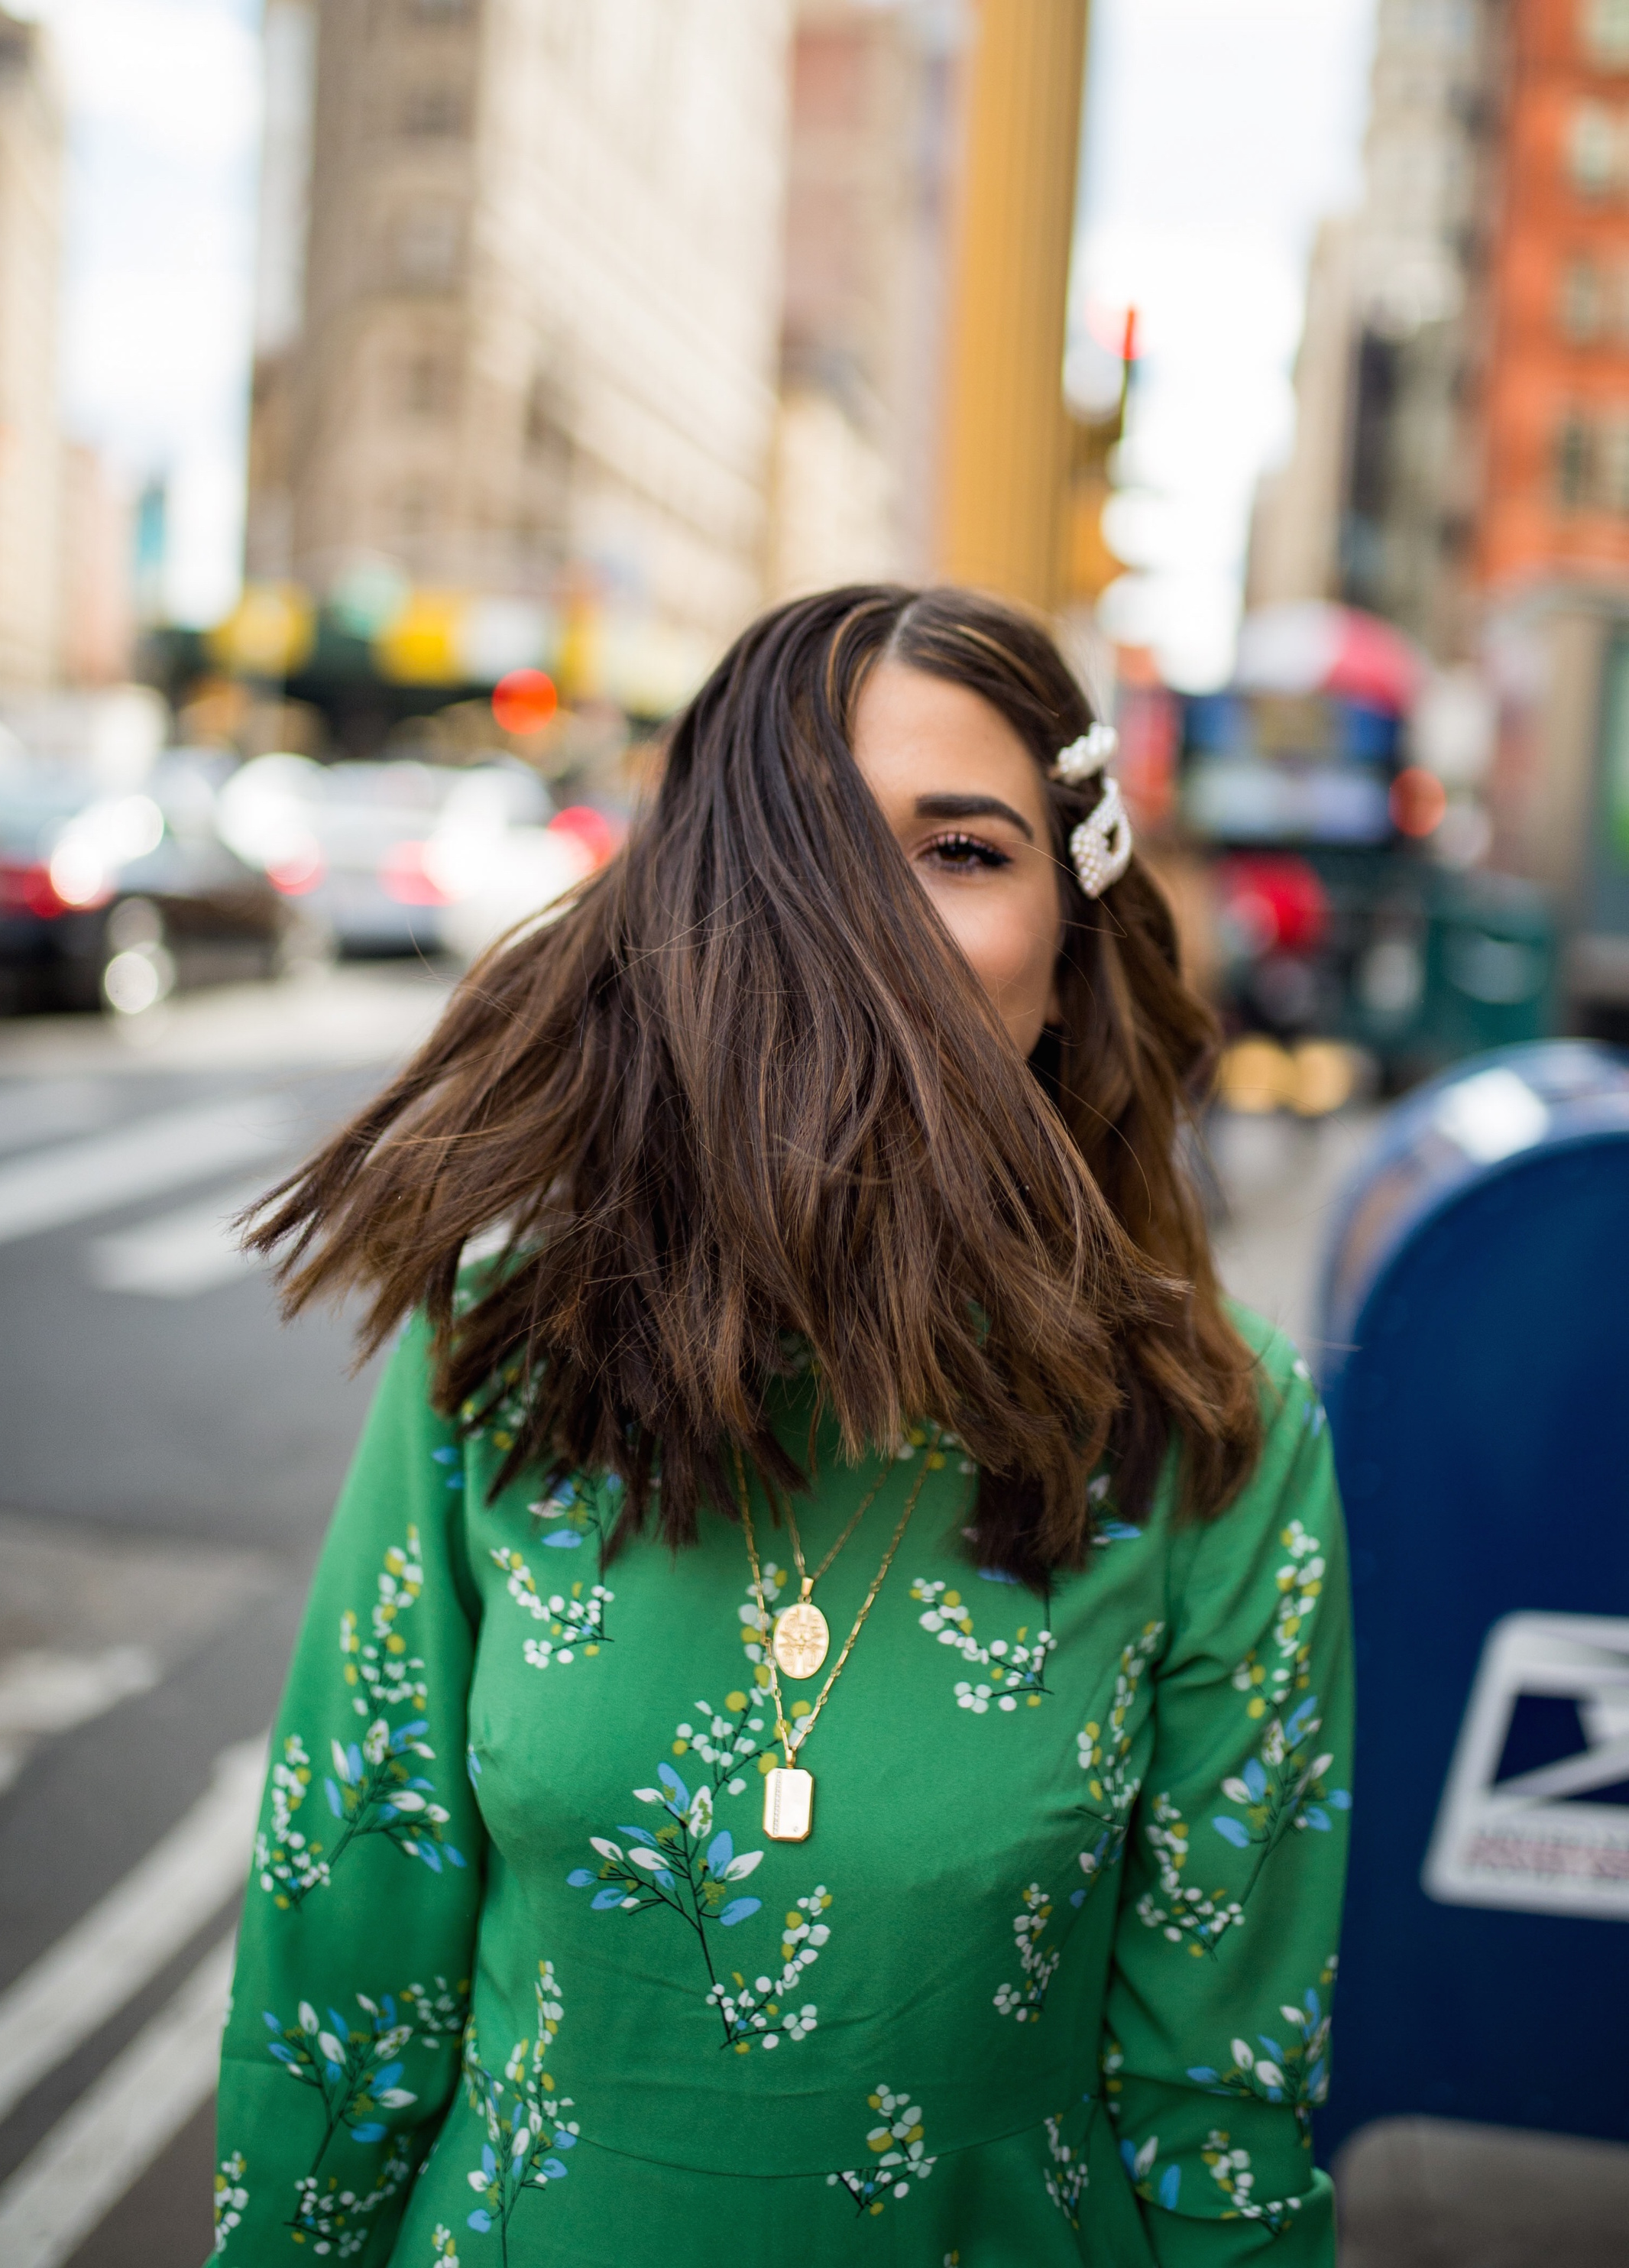 Fresh Cut And Color Sharon Dorram Color at Sally Hershberger Esther Santer Fashion Blog NYC Street Style Blogger Short Layered Haircut Balayage Honey Highlights New York City Upscale Salon Chop Natural Inspo Clips Pearl Barrettes Hair Accessories.JPG